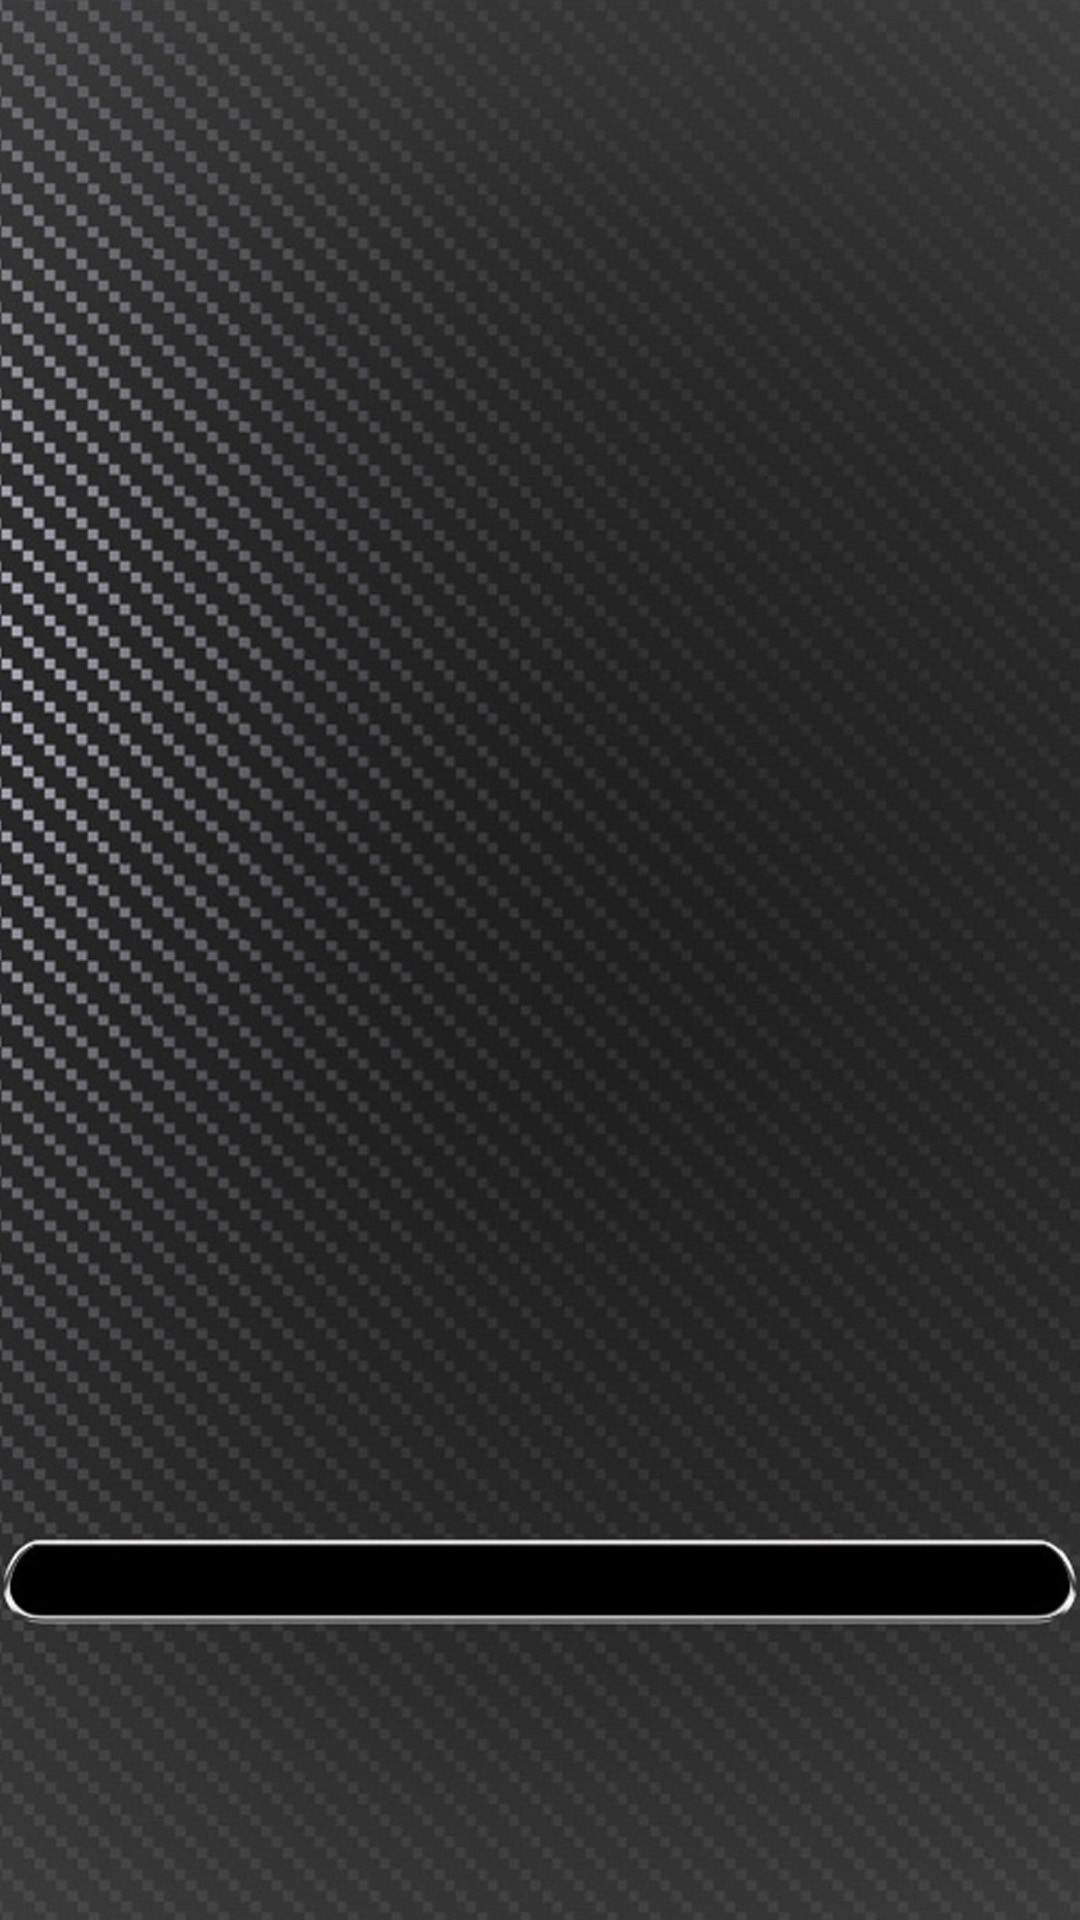 1080x1920 Carbon Fiber Sony Xperia Z2 Wallpapers